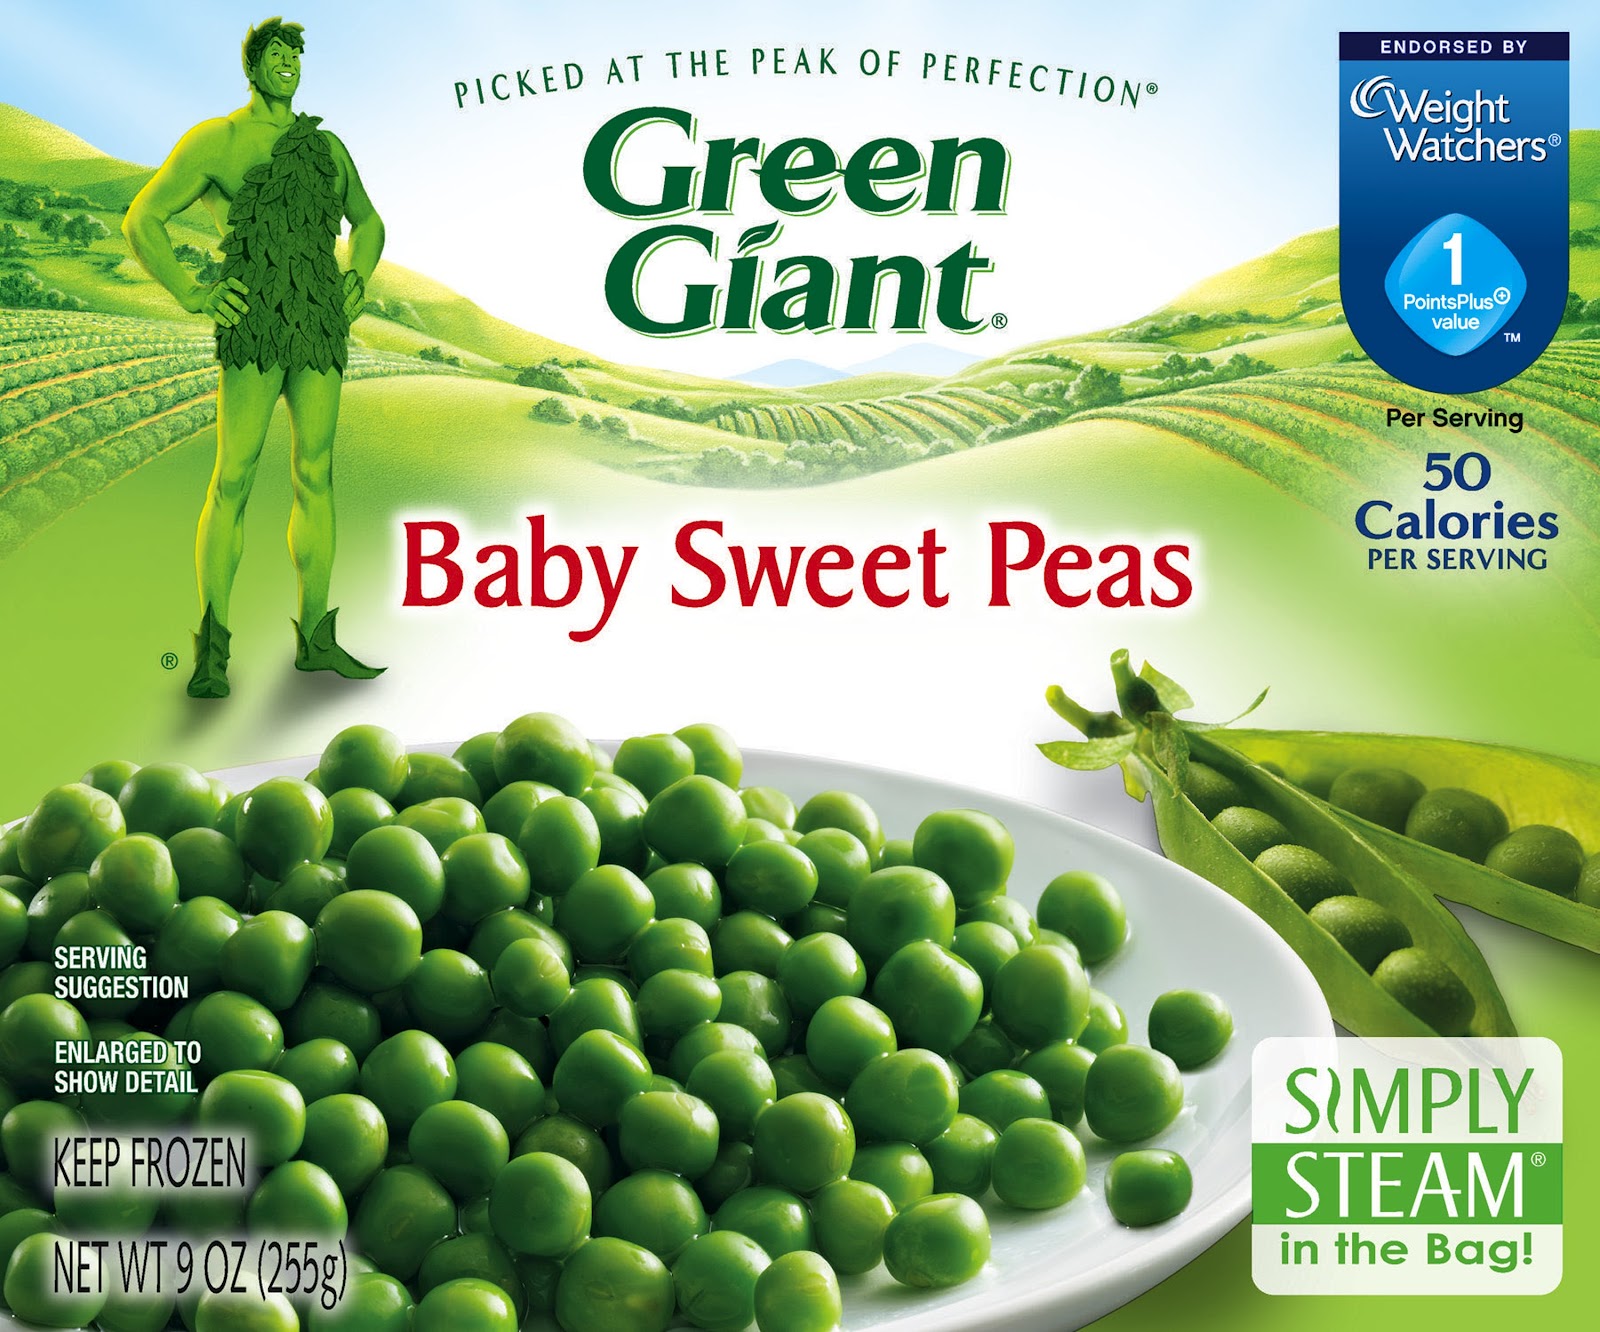 Green Giant Frozen Vegetables Only $0.80 at Publix Starting 10/3